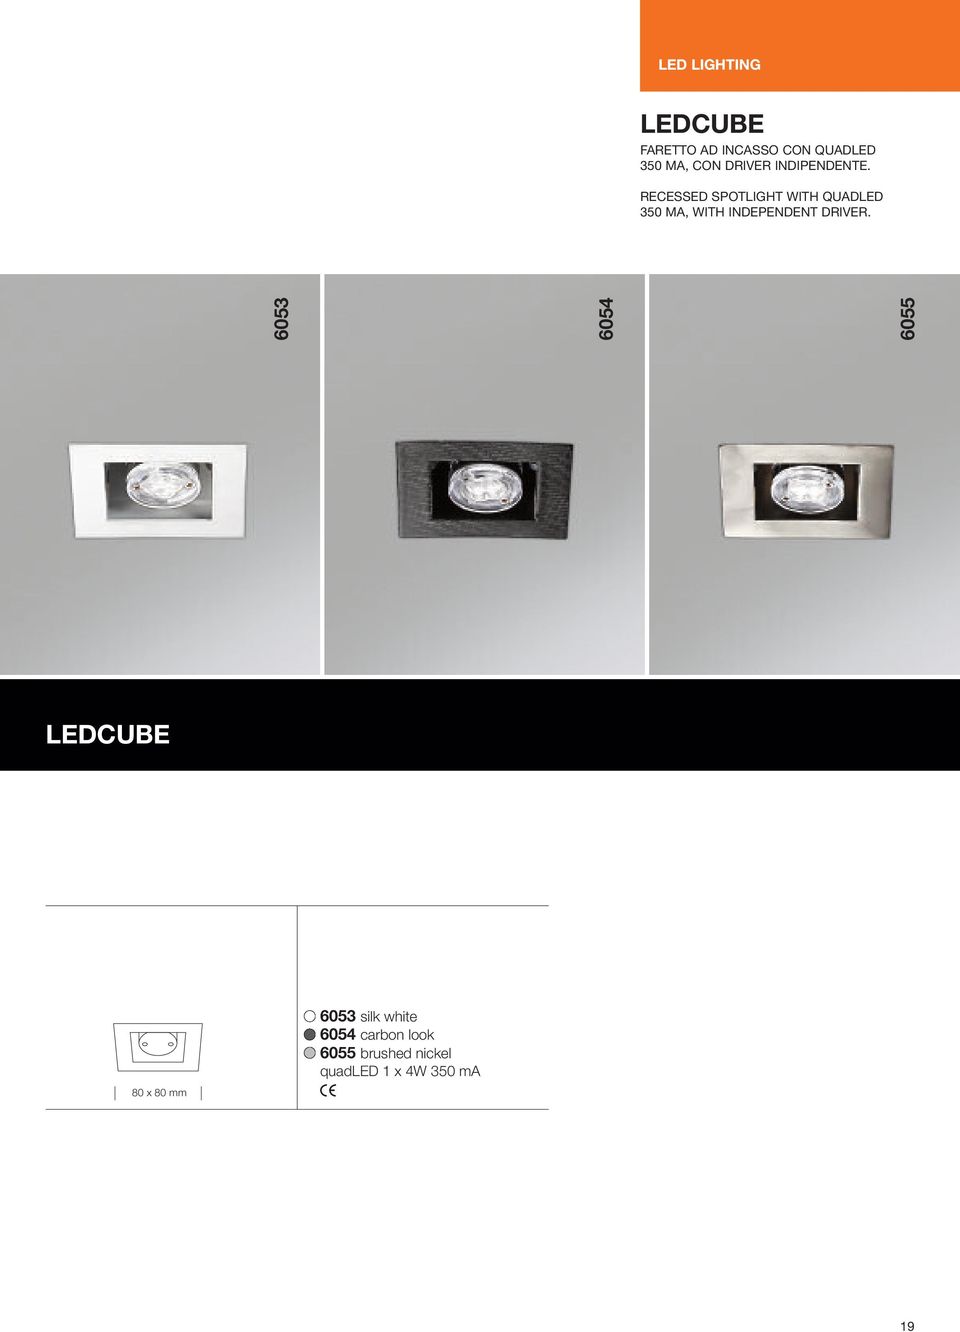 RECESSED SPOTLIGHT WITH QUADLED 350 MA, WITH INDEPENDENT DRIVER.